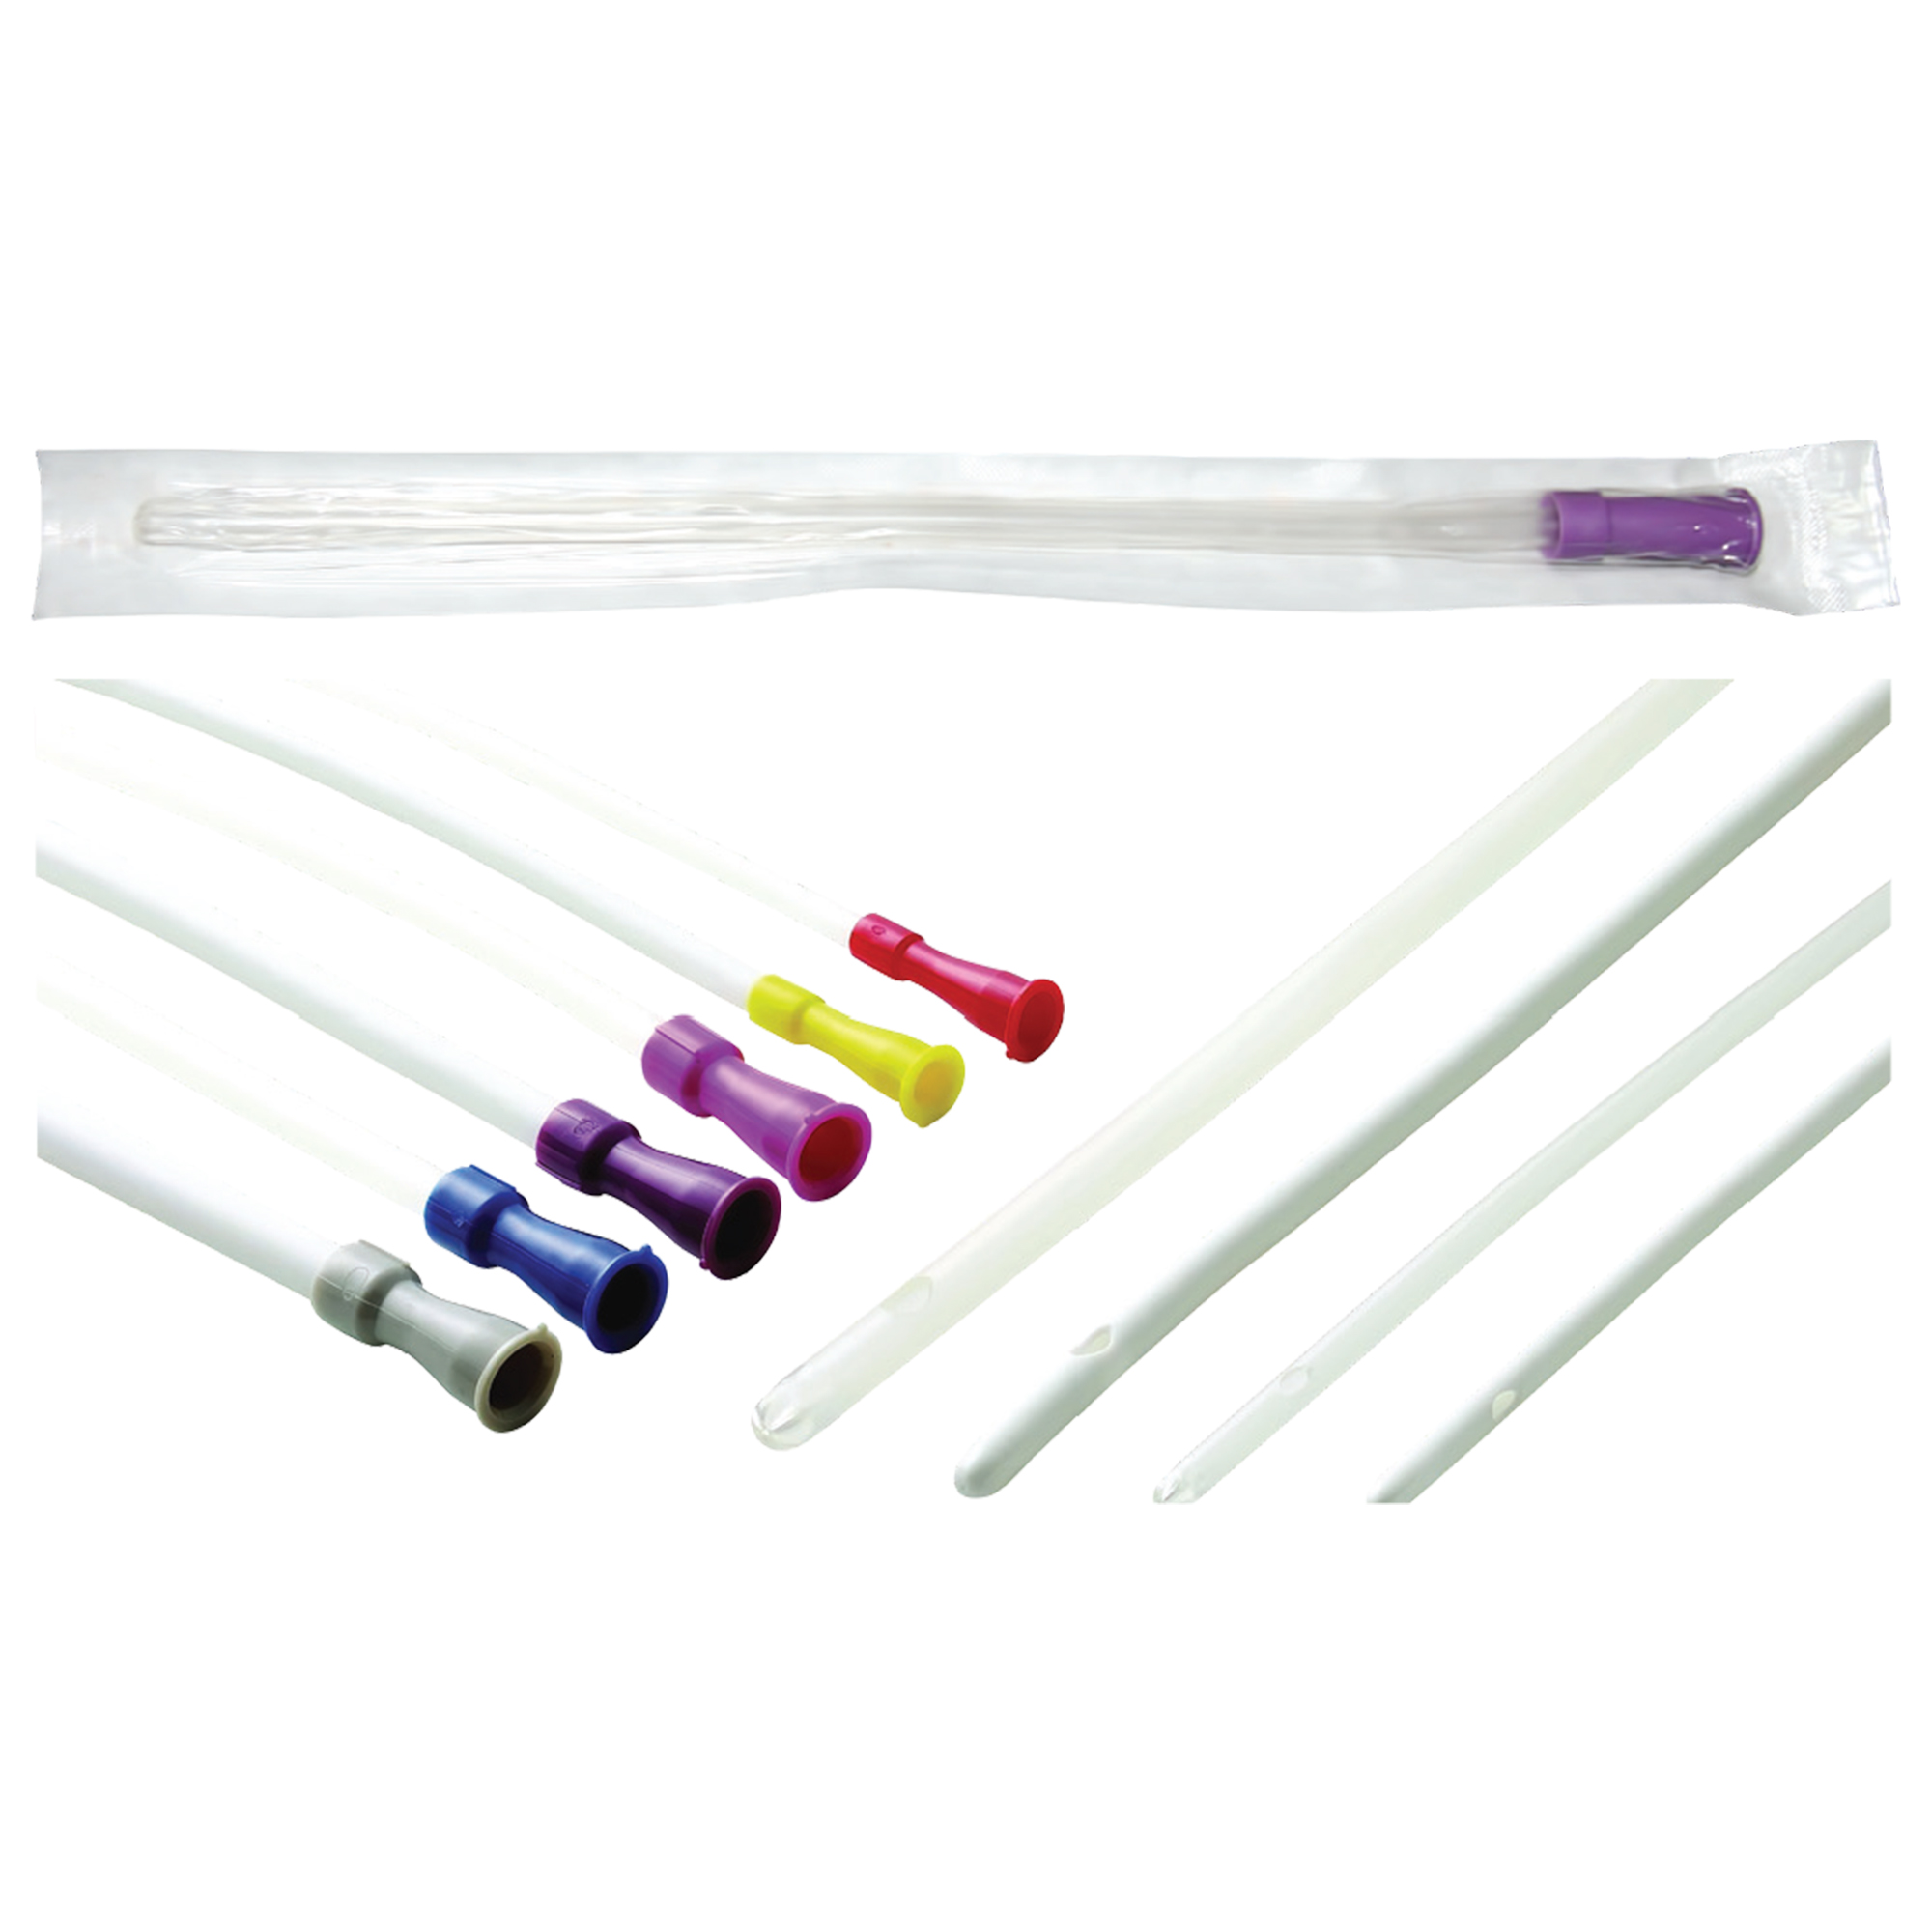 Medical practice/FOLEY CATHETERS, RECTAL CANNULAS/Rectal Cannulas